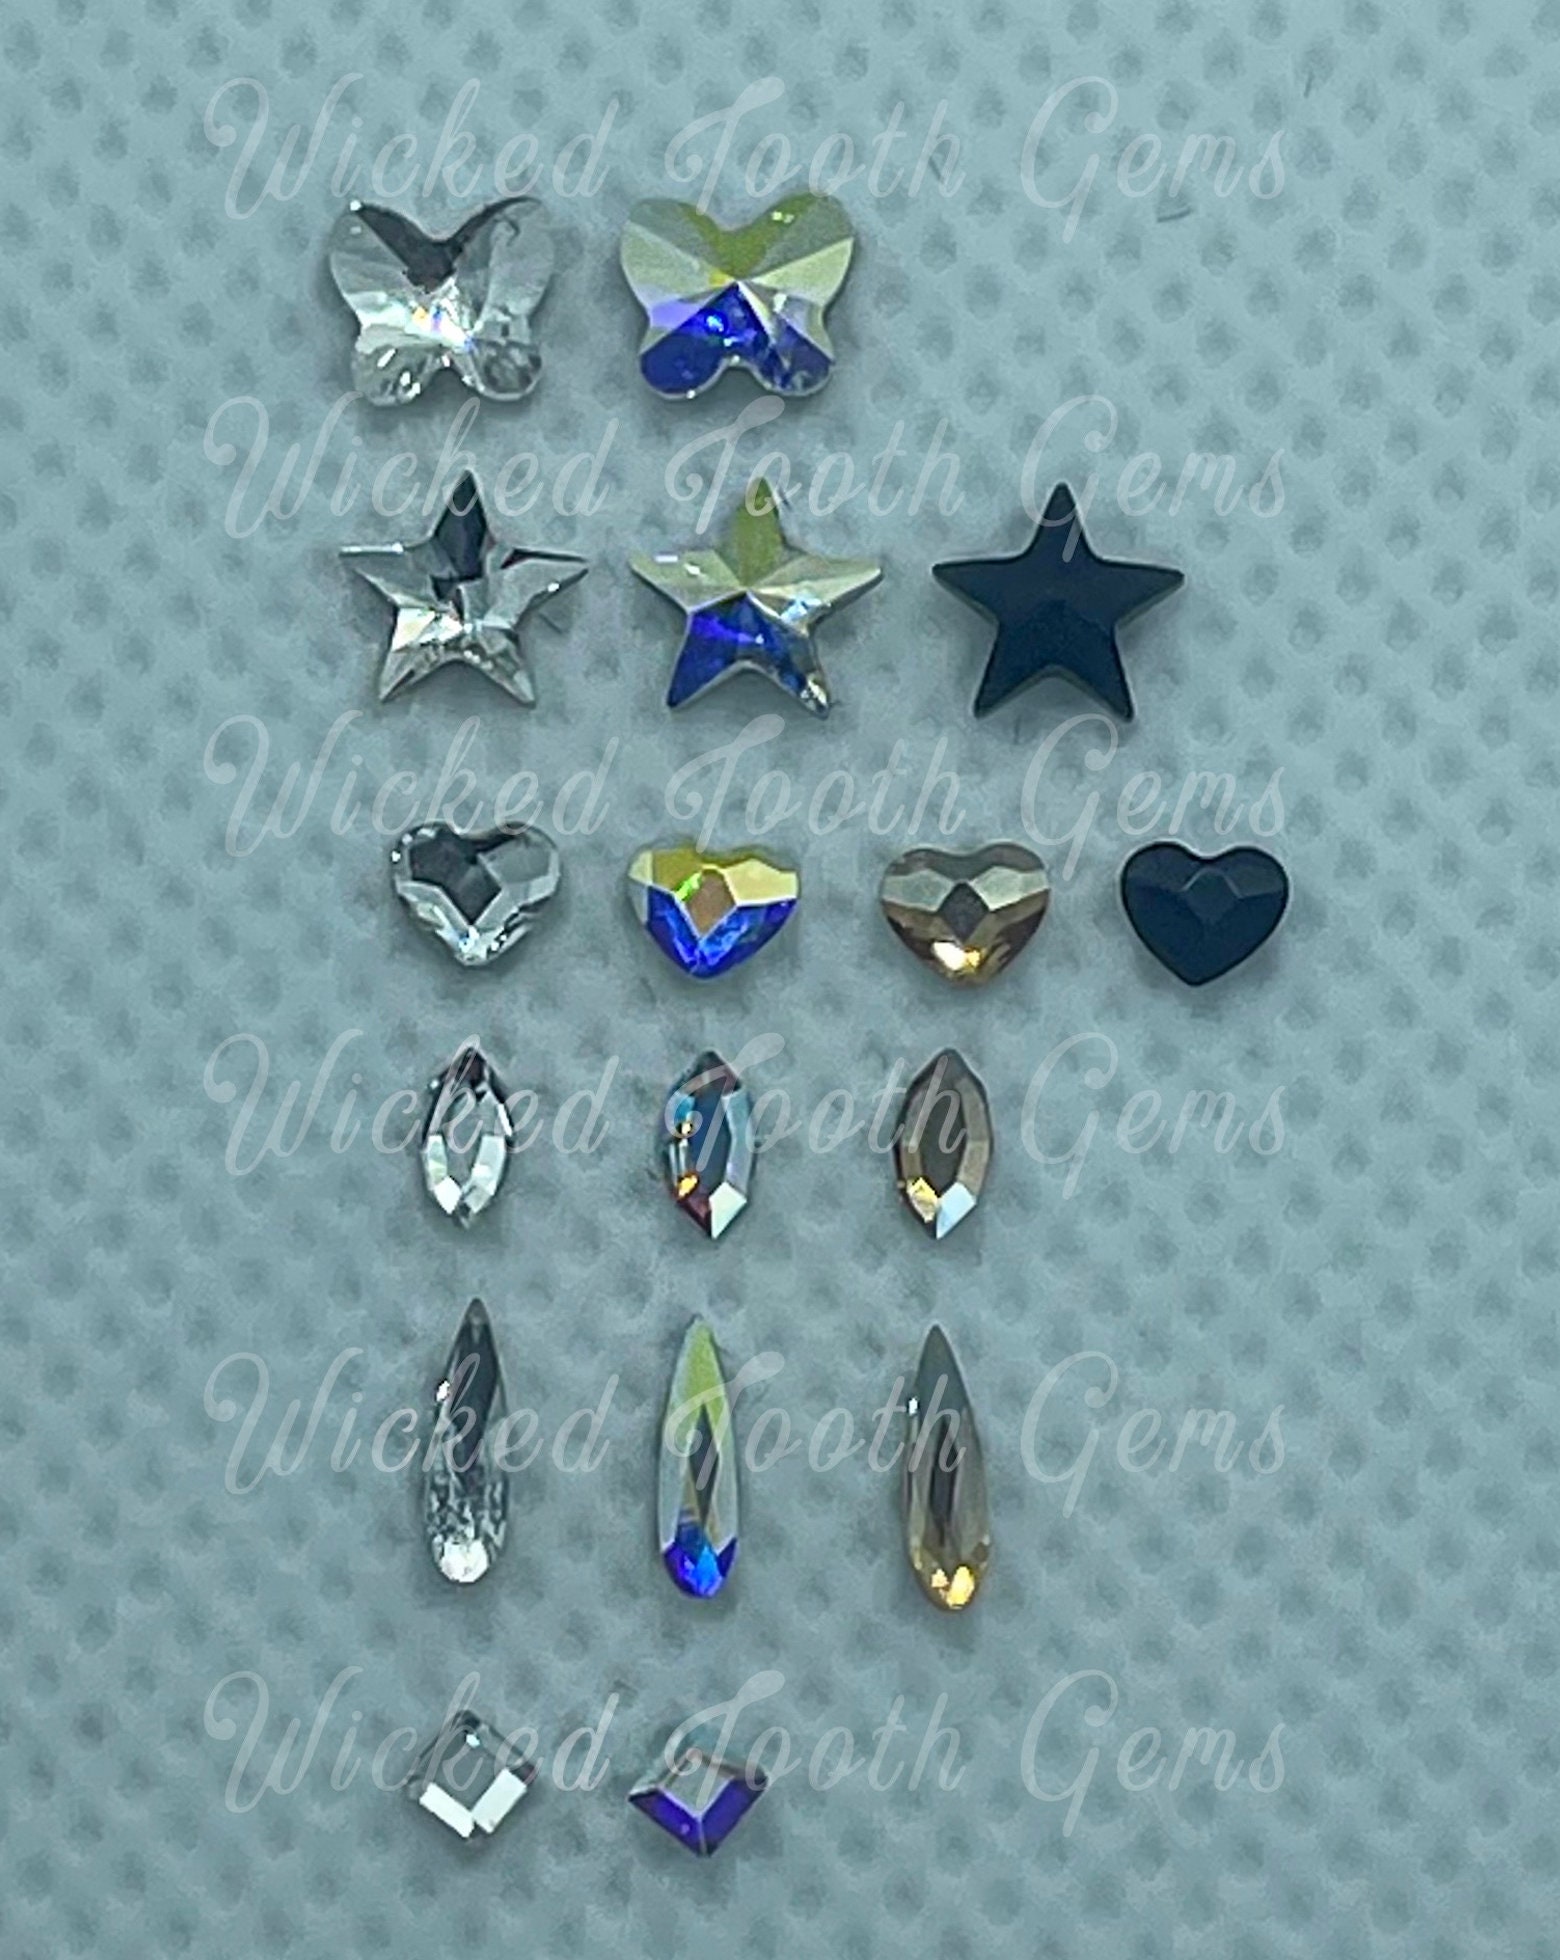 Butterfly Tooth Gem Crystal Design, Tooth Gem Kits, Tooth Jewelry 